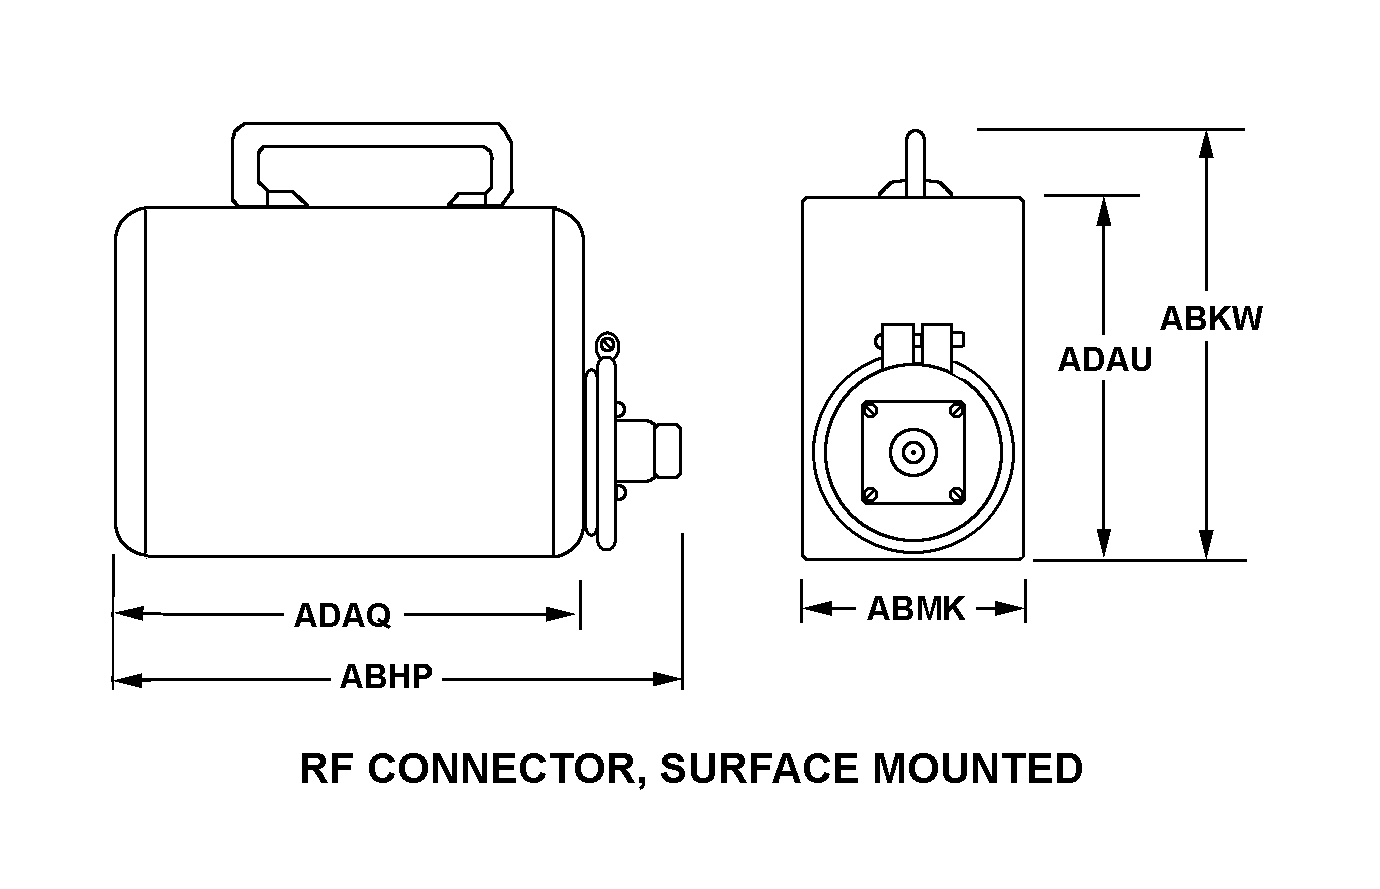 RF CONNECTOR, SURFACE MOUNTED style nsn 5985-01-227-4221